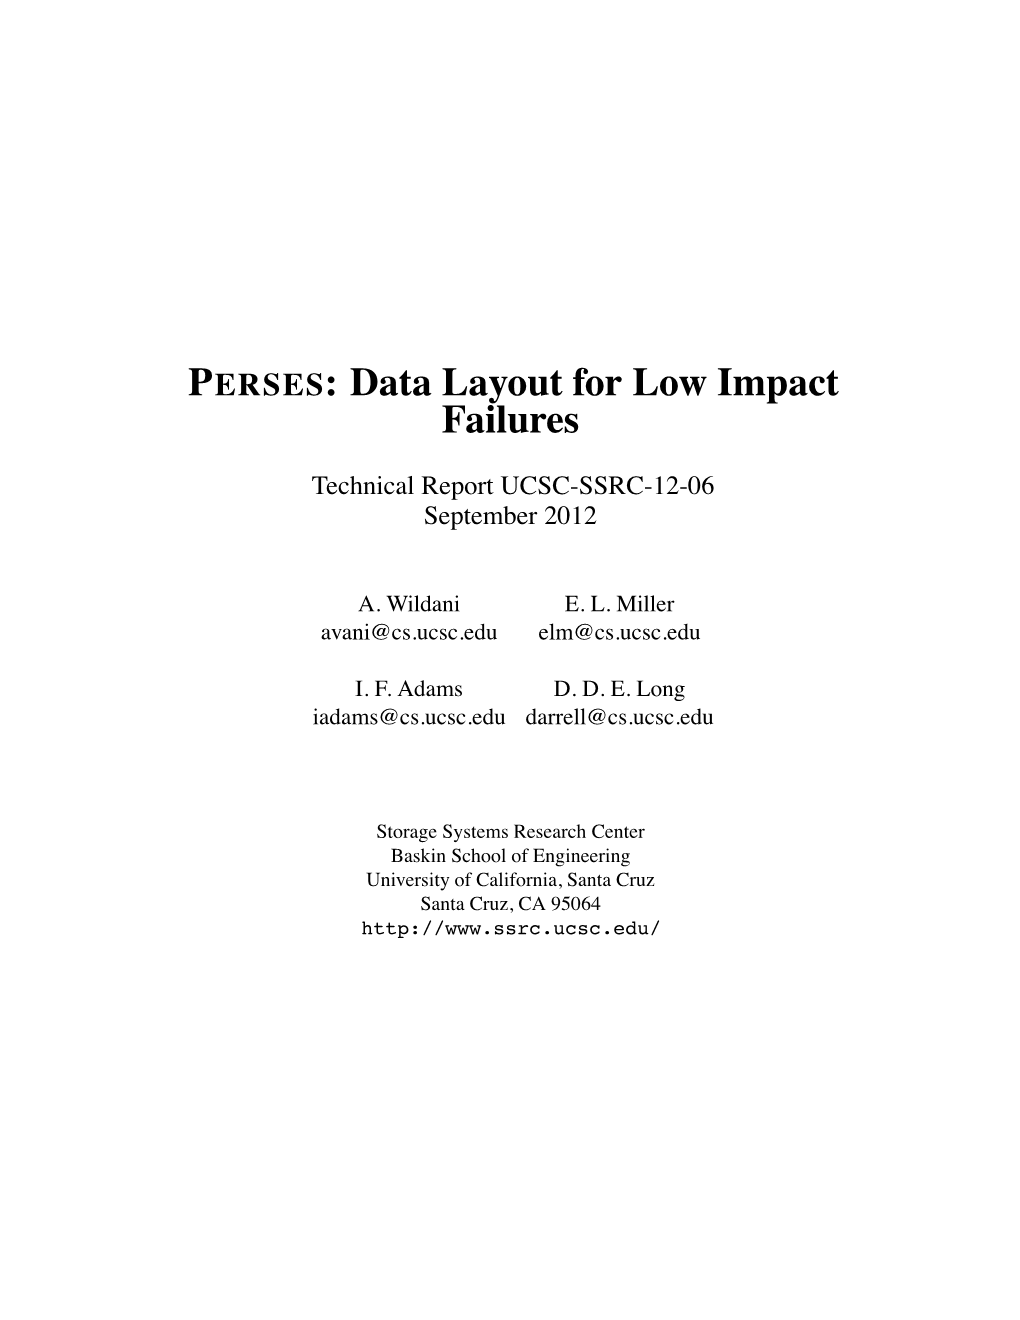 PERSES: Data Layout for Low Impact Failures